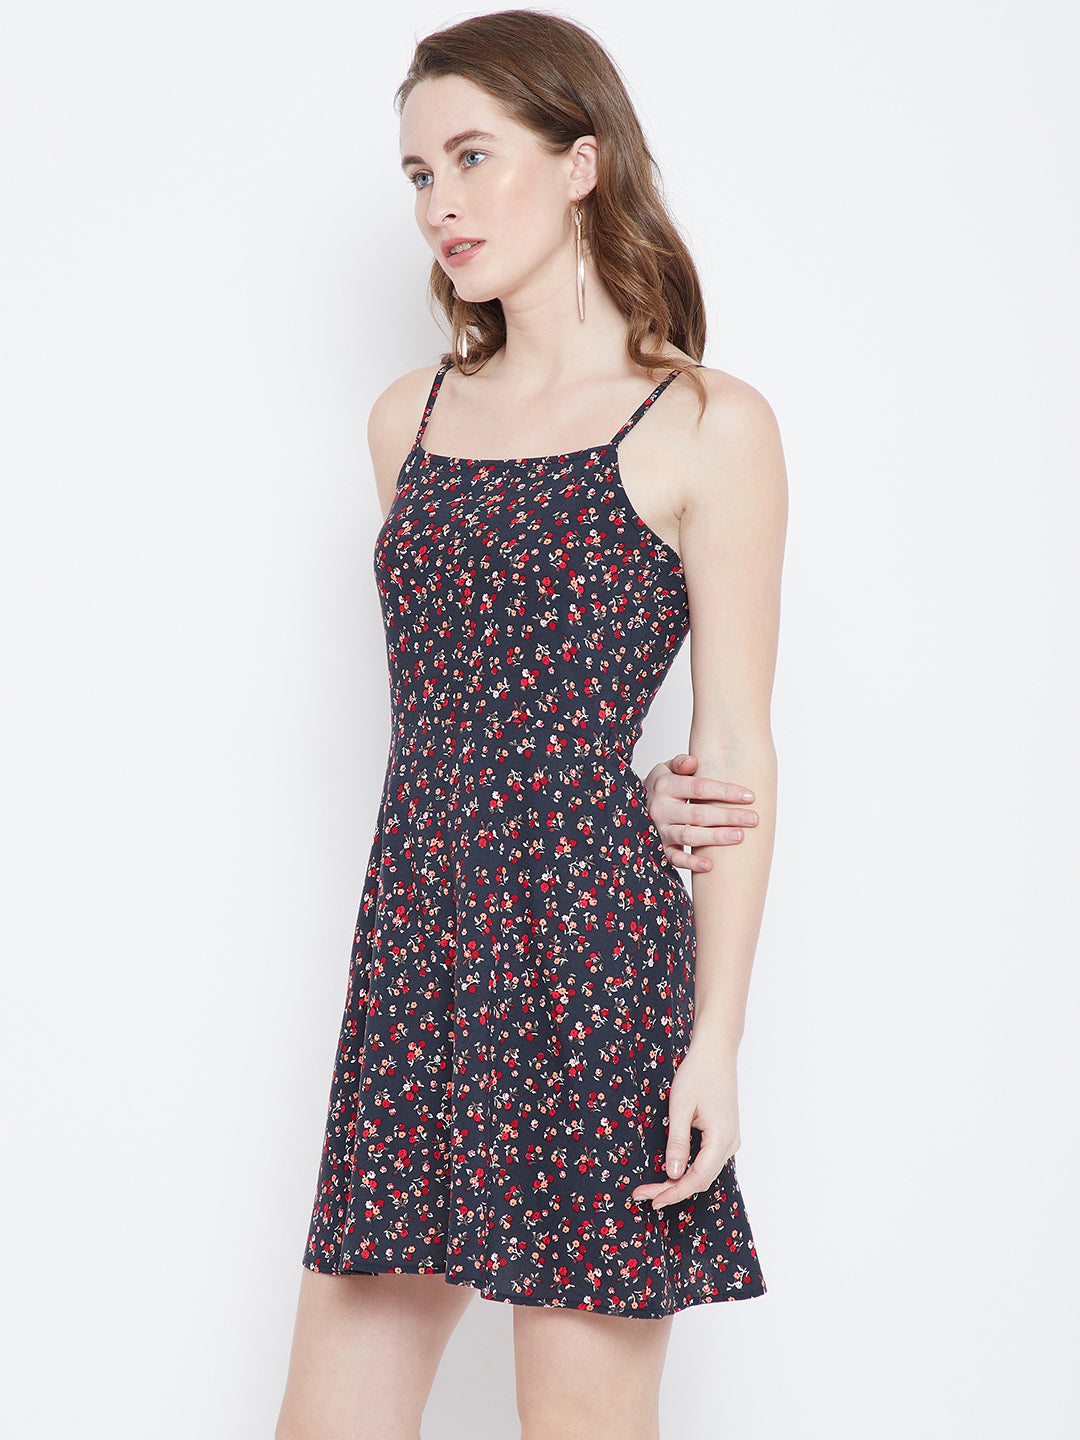 Navy Blue Printed Fit and Flare Dress - Berrylush